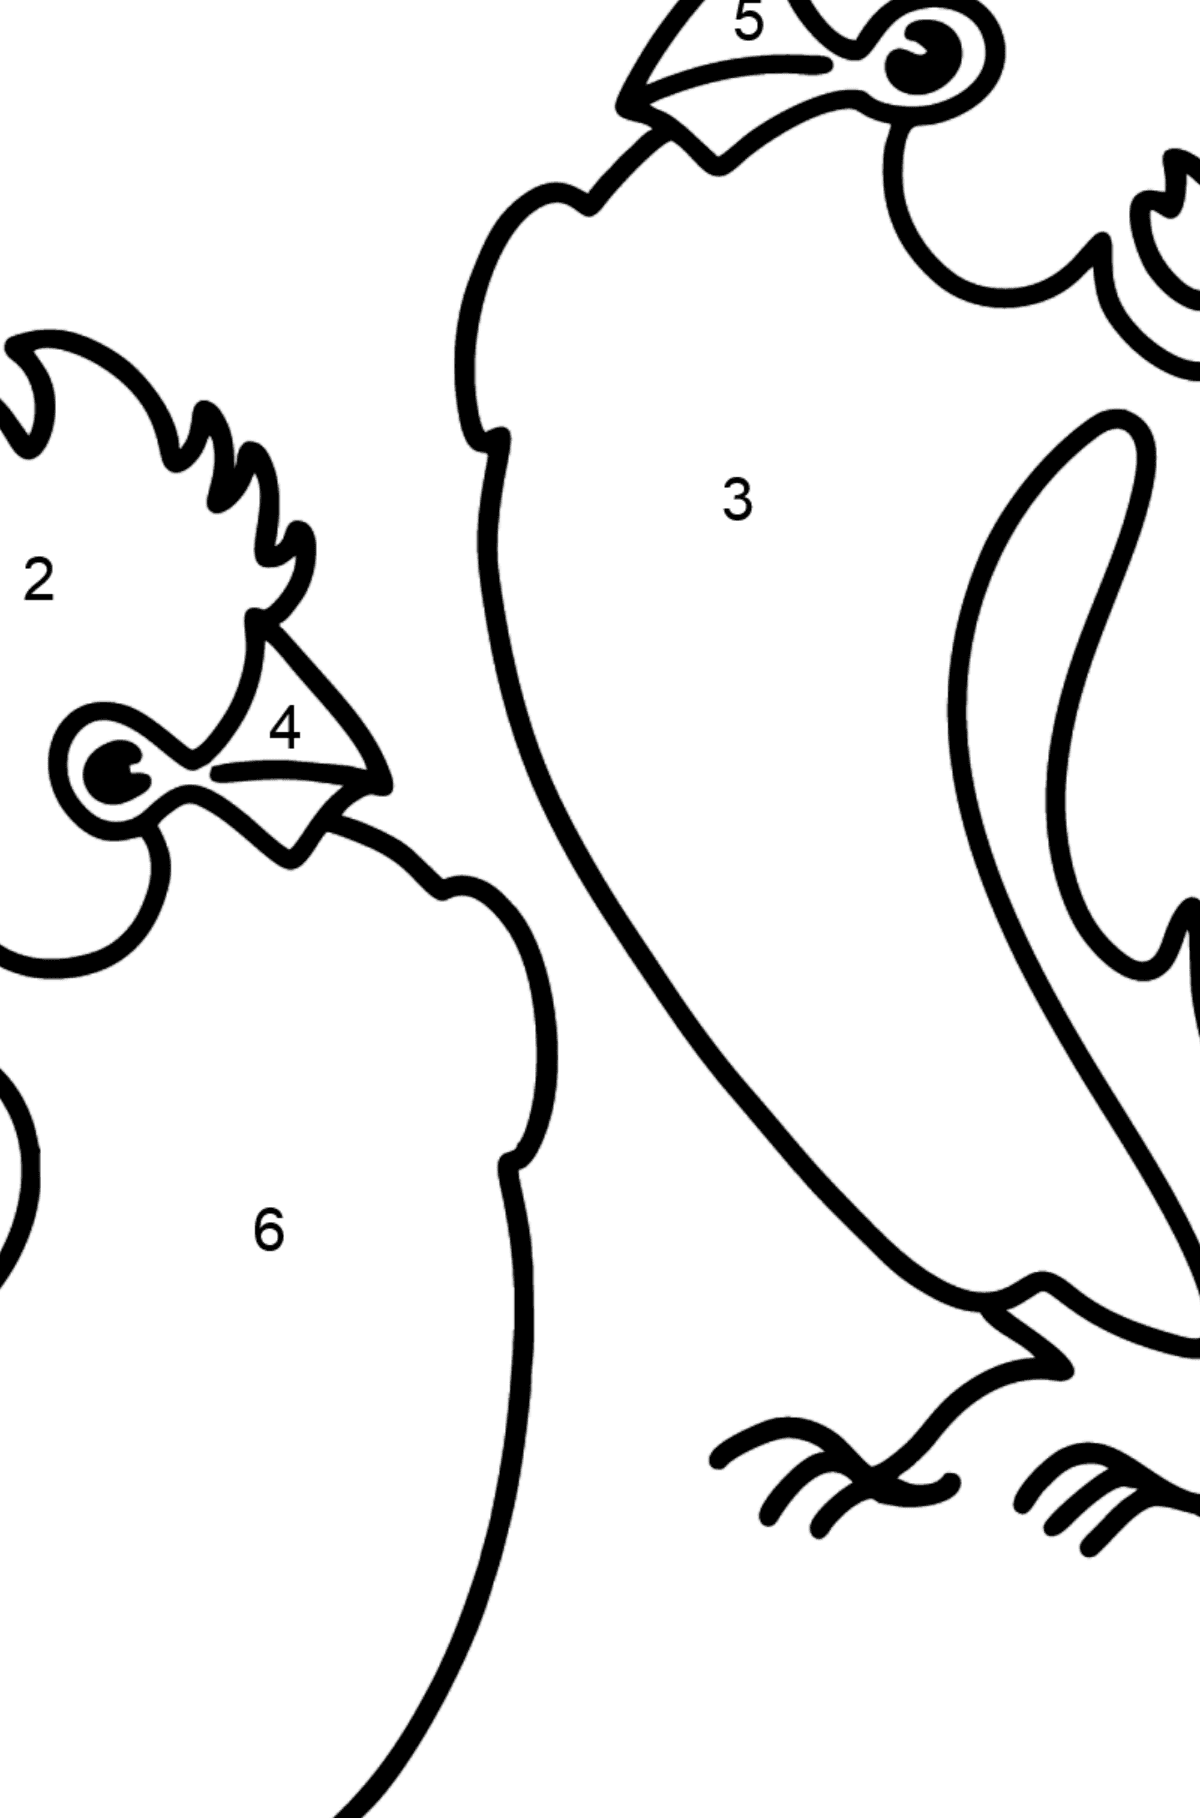 2 Parrots coloring page - Coloring by Numbers for Kids